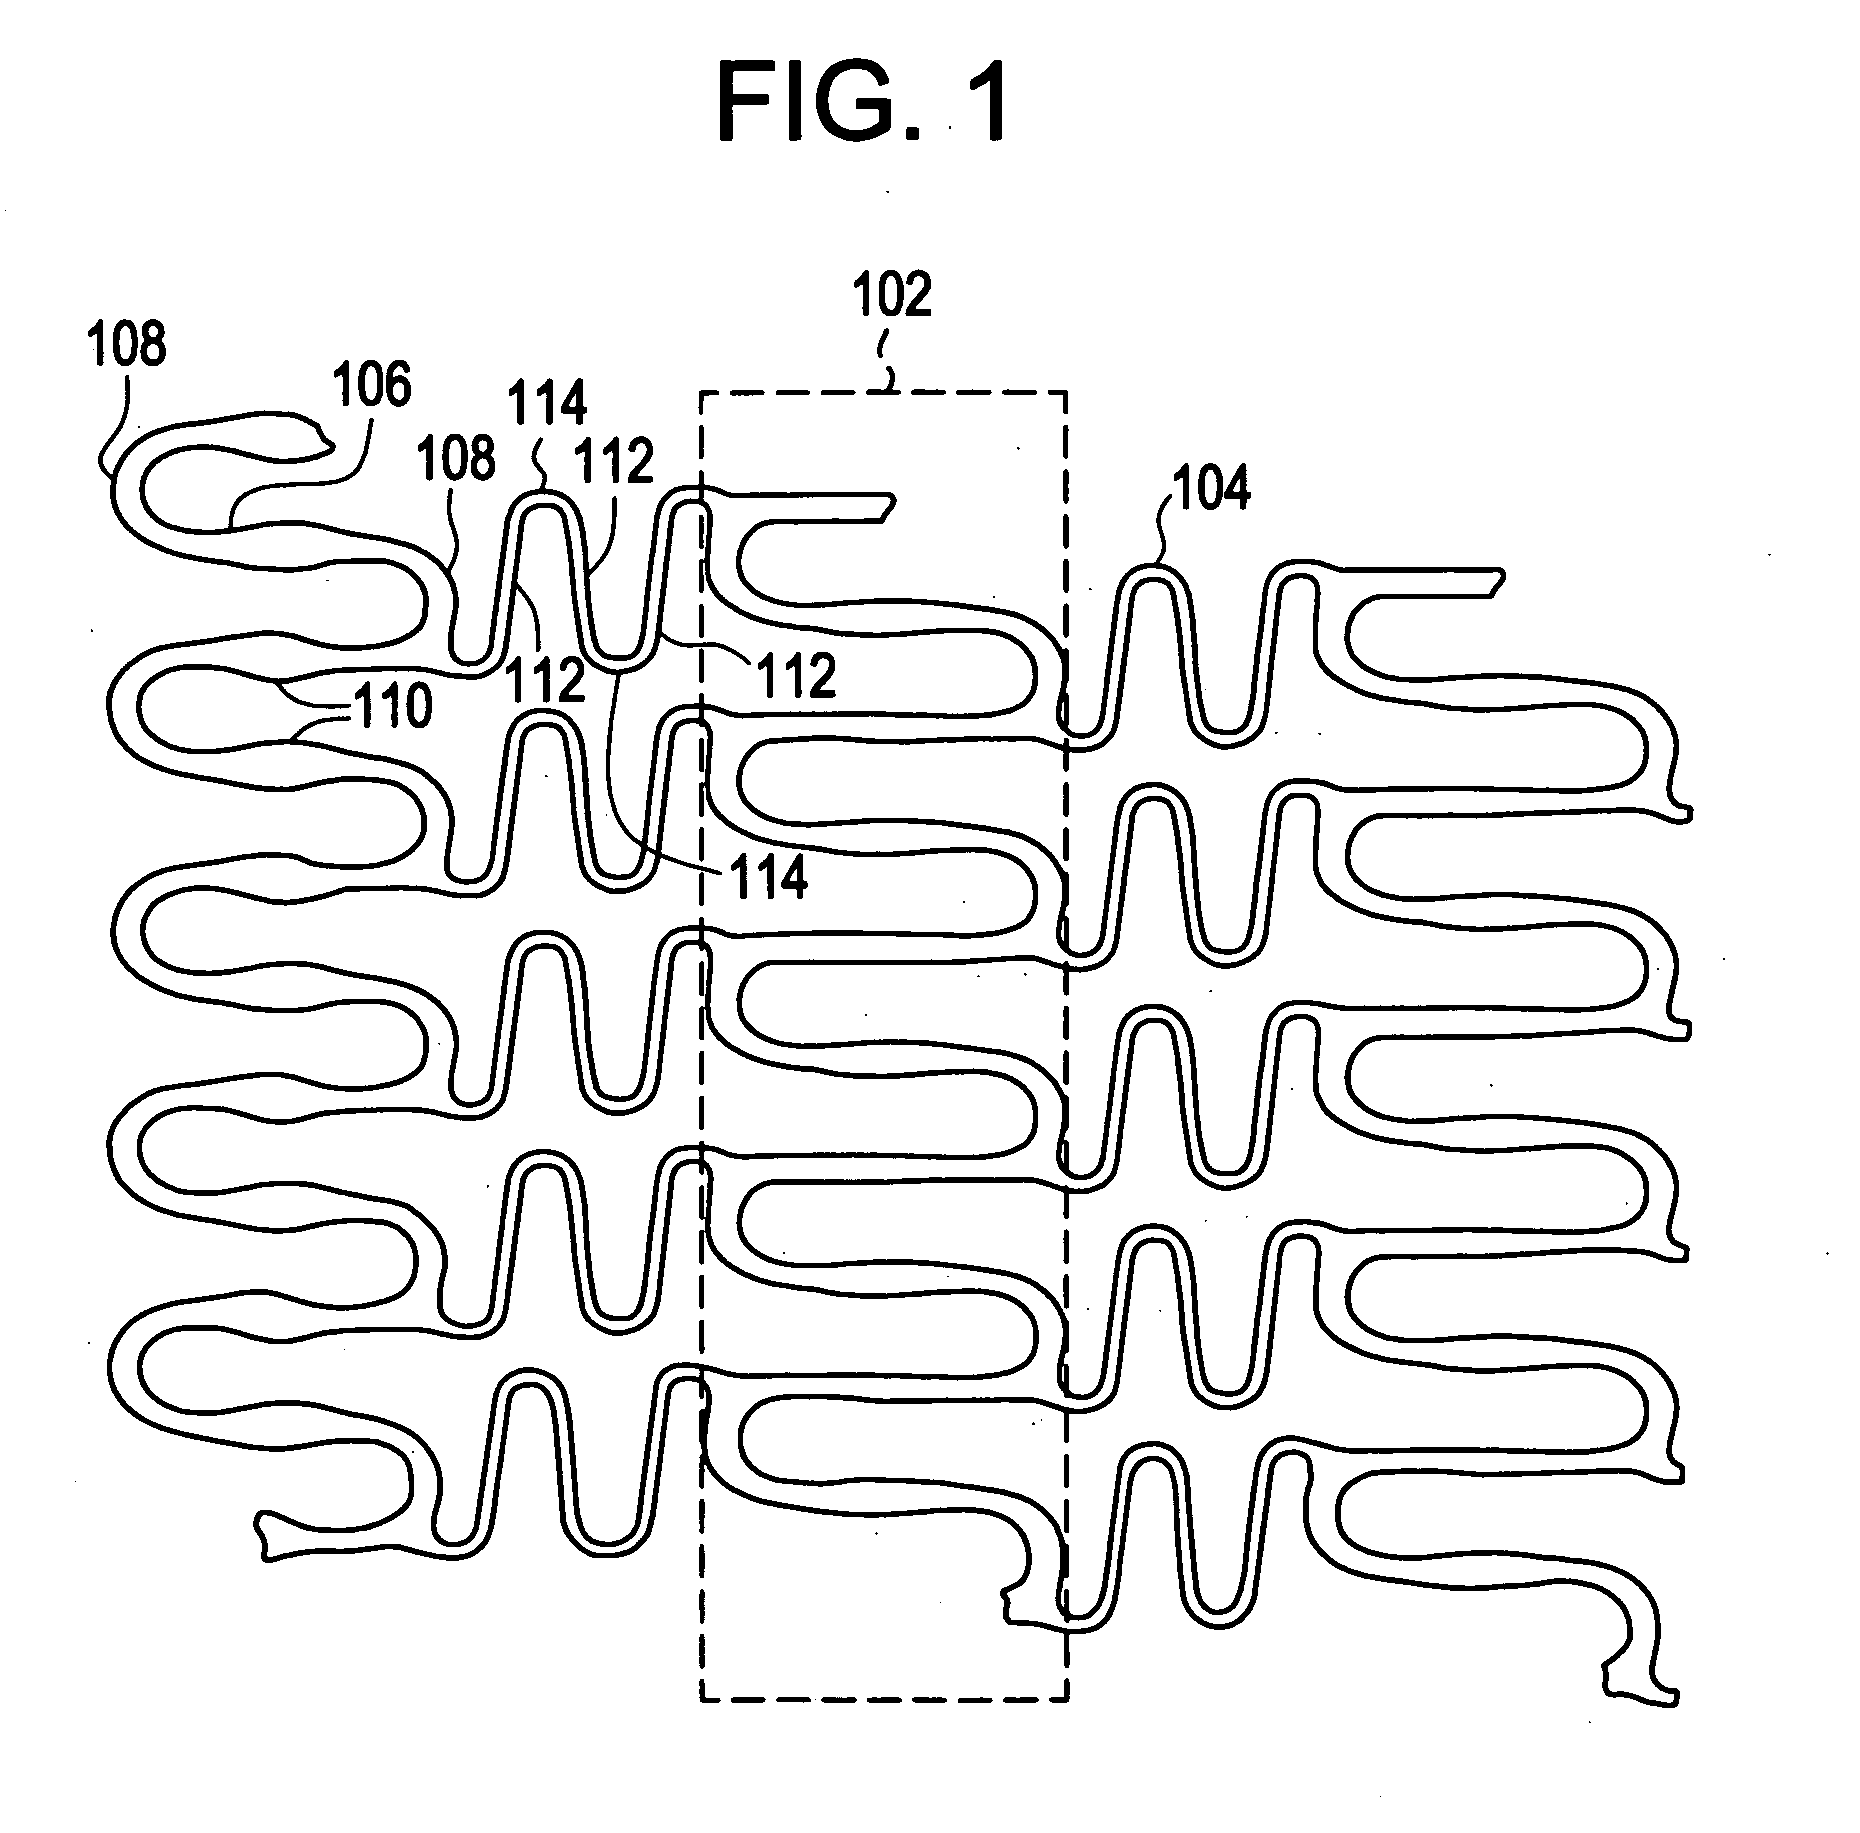 Implantable device formed from polymer blends having modified molecular structures